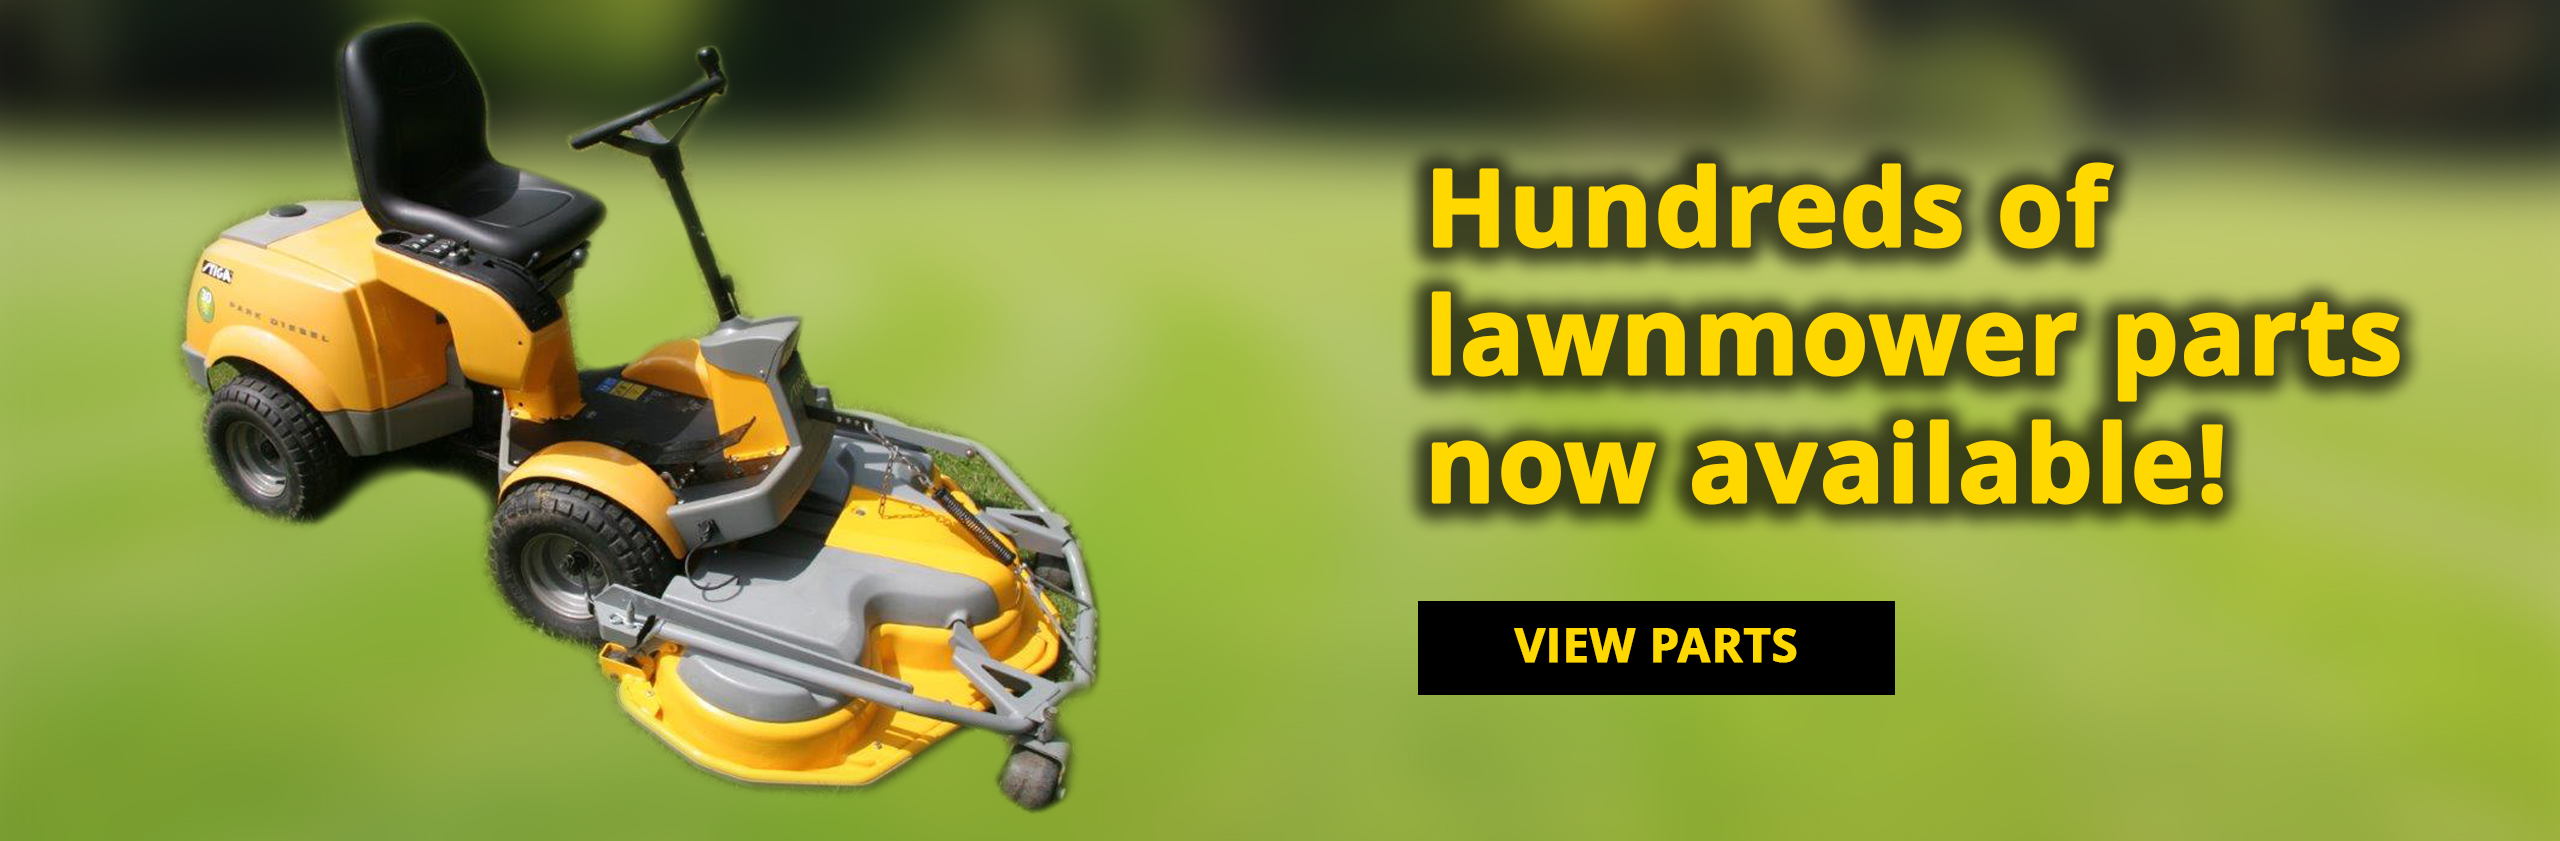 Hundreds of lawnmower parts available now.